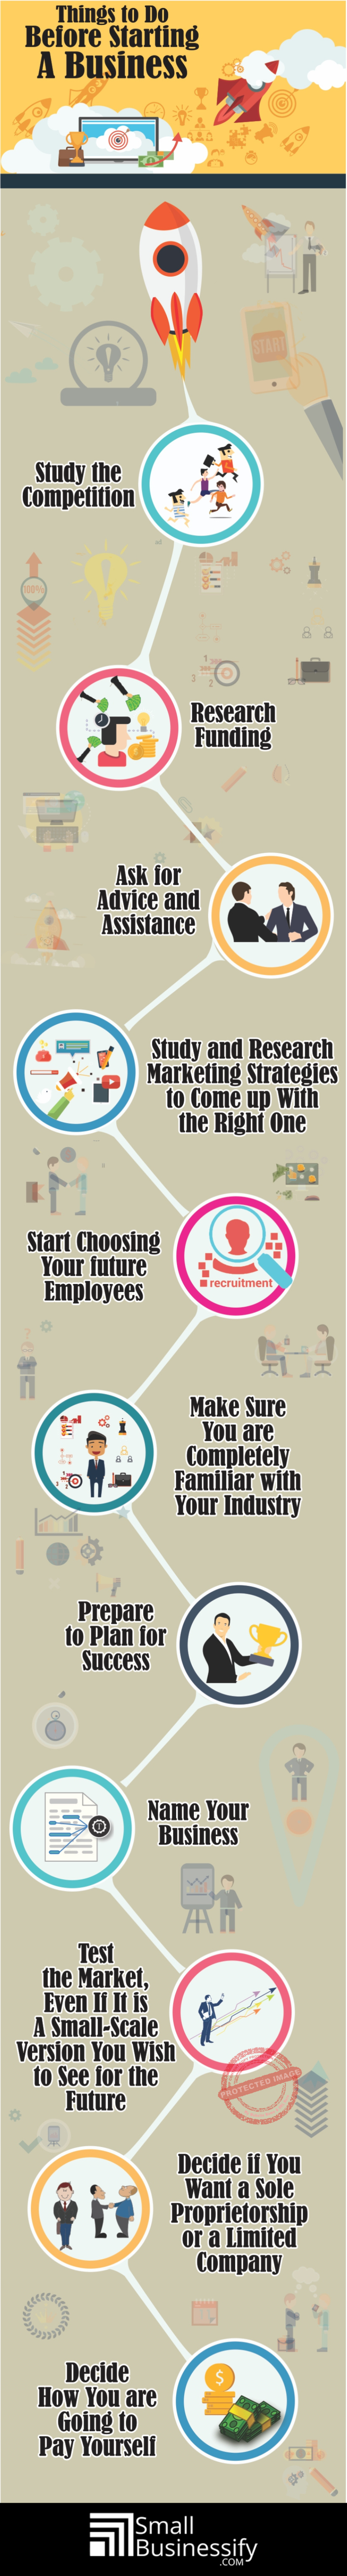 Things to Do Before Starting A Business Infographic